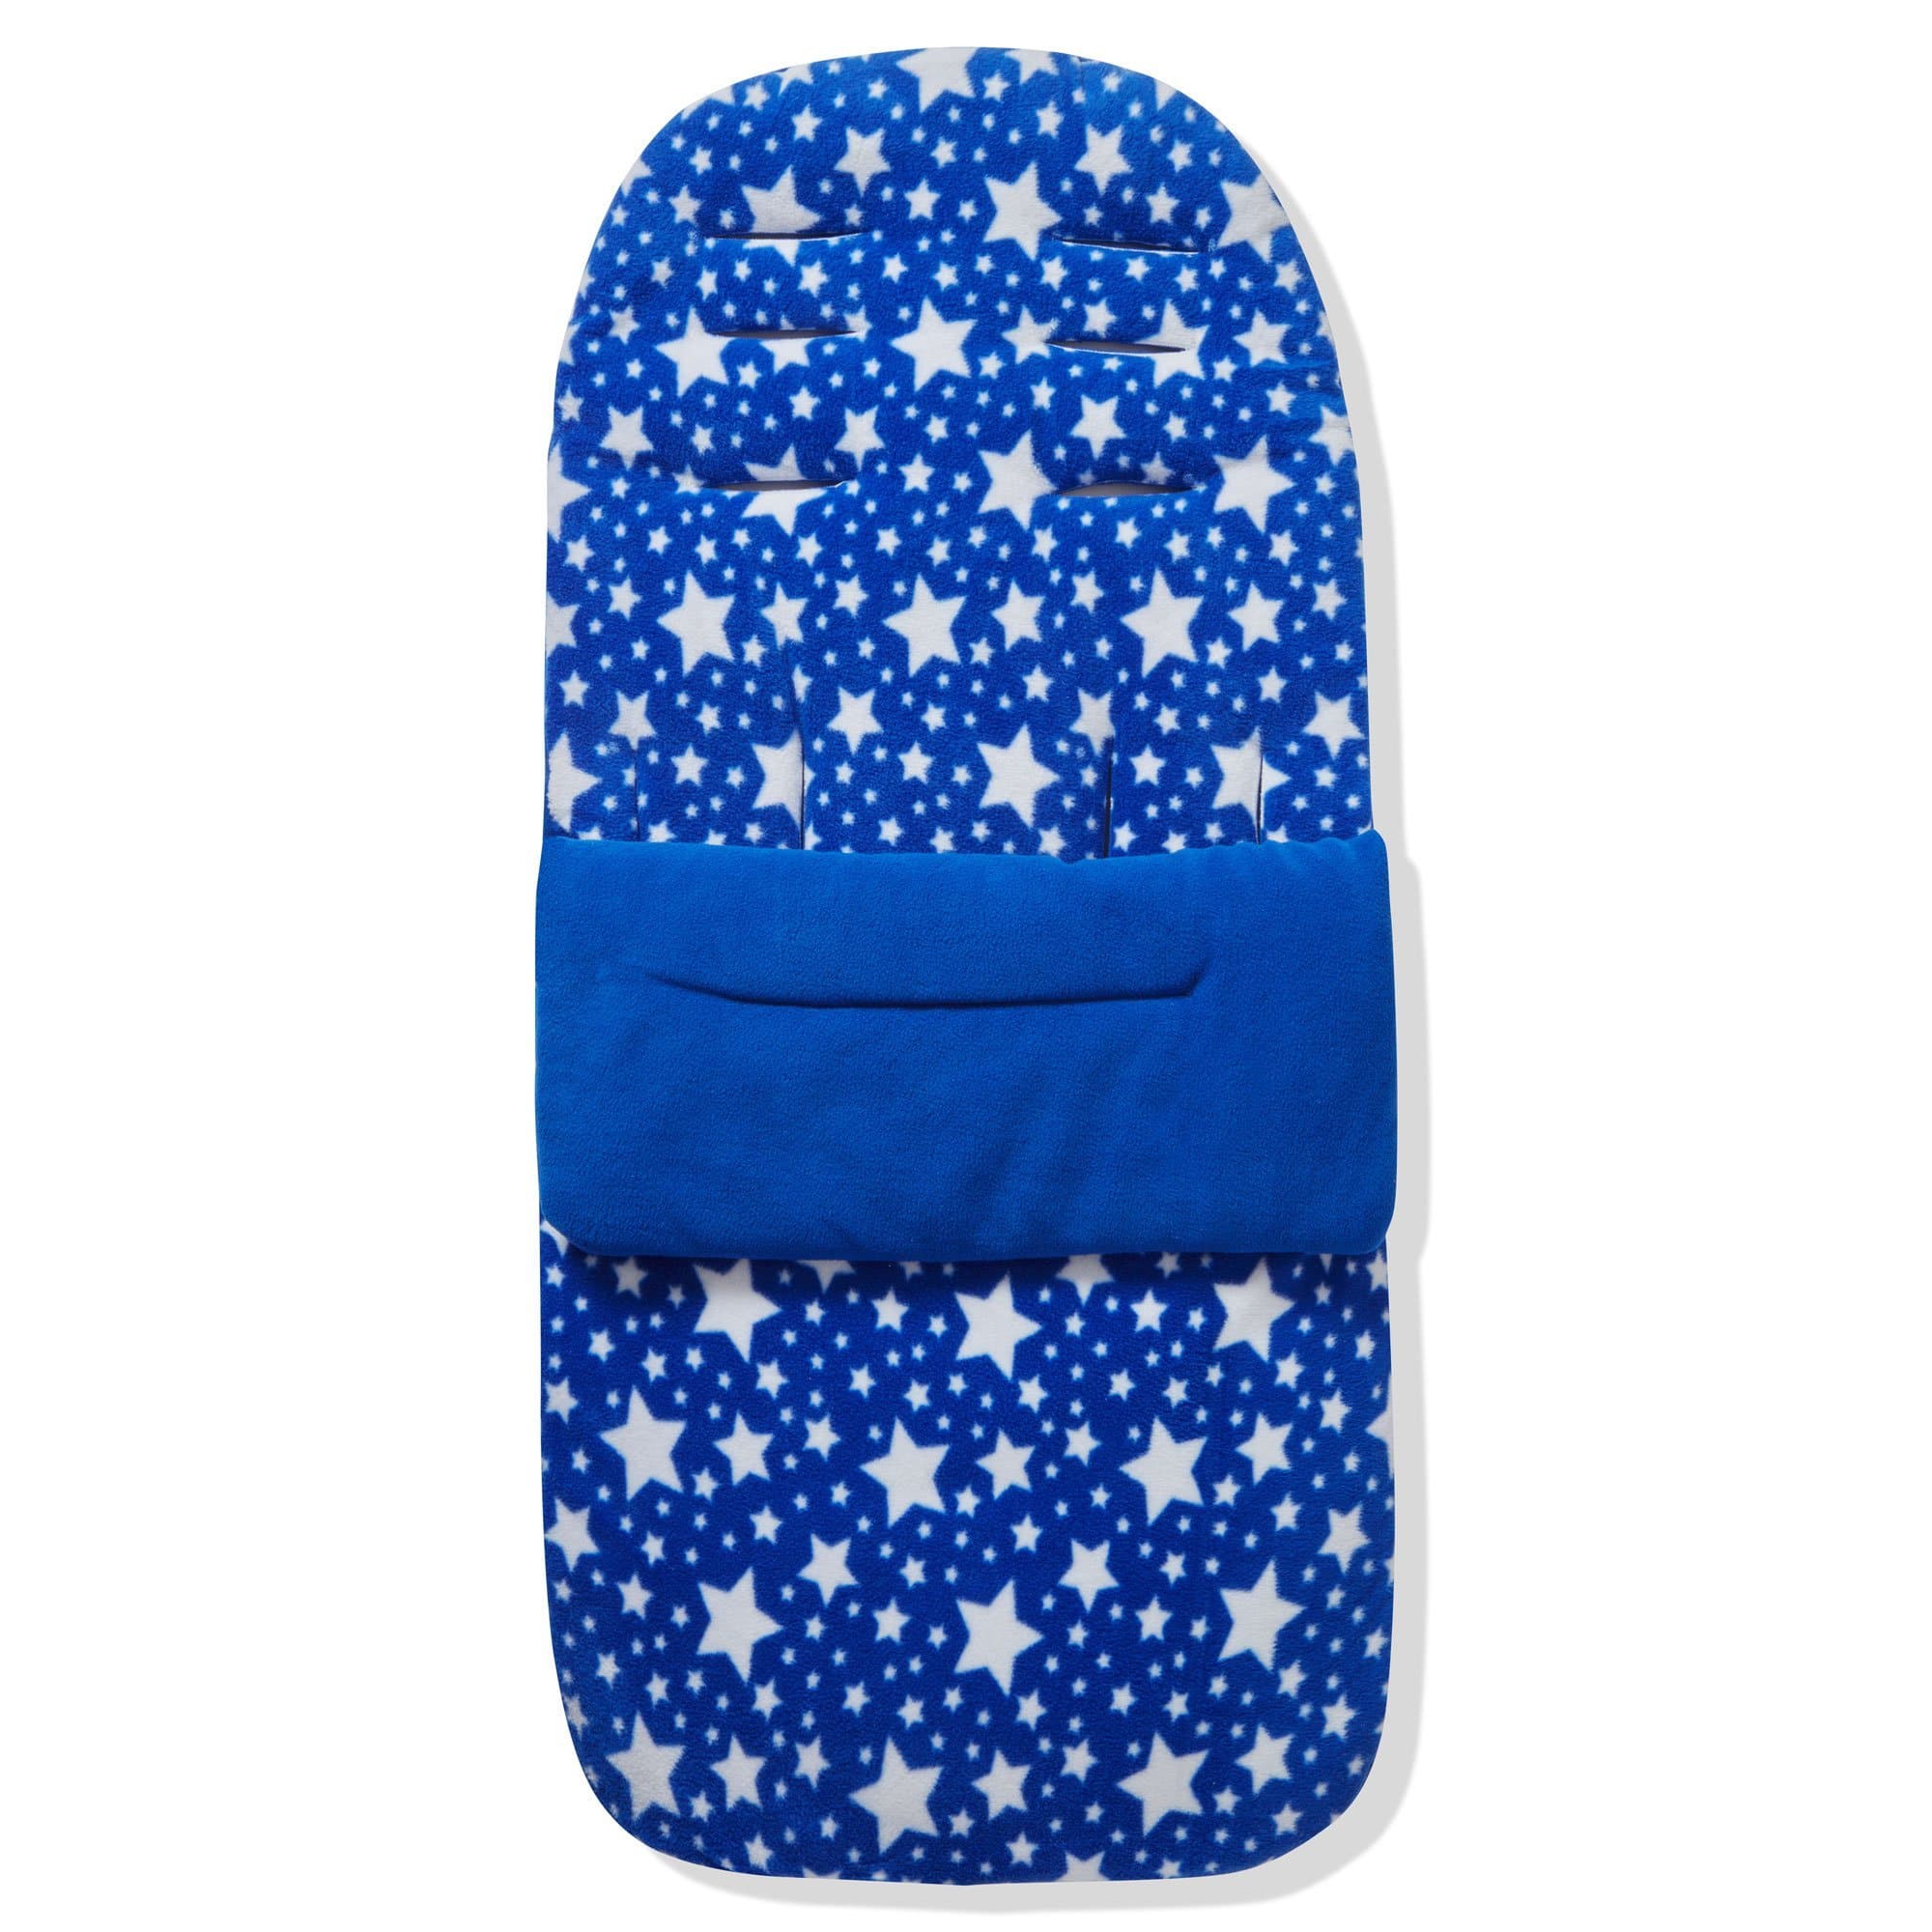 Fleece Footmuff / Cosy Toes Compatible with Graco - Blue Star / Fits All Models | For Your Little One